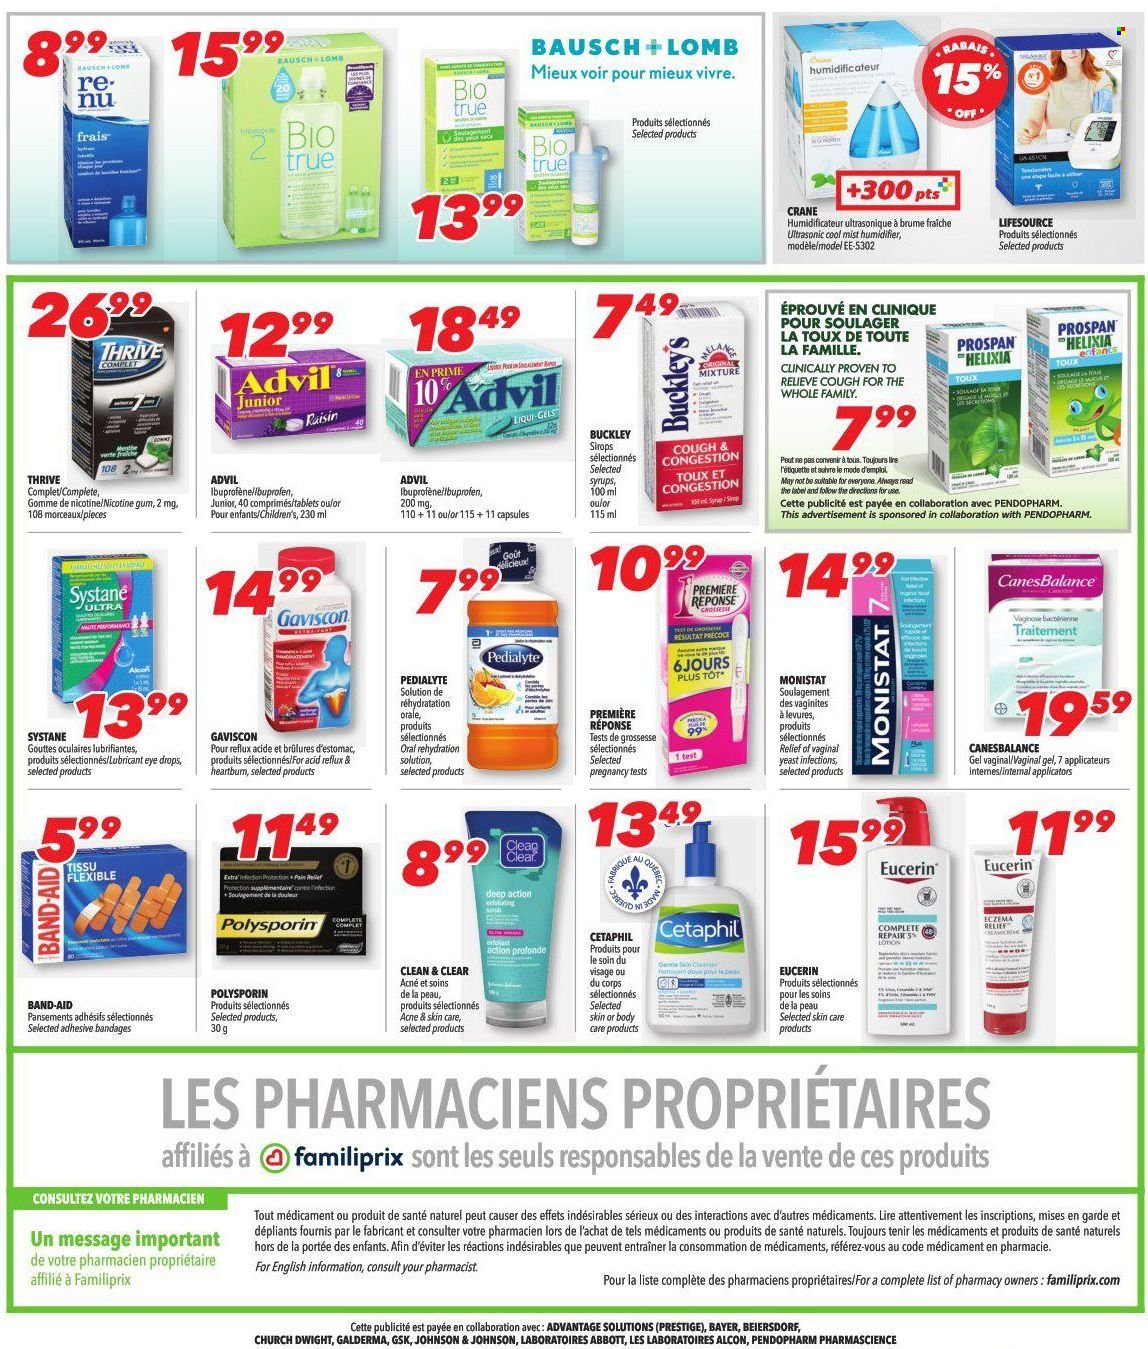 thumbnail - Familiprix Extra Flyer - January 20, 2022 - January 26, 2022 - Sales products - Johnson's, Clinique, Clean & Clear, body lotion, lubricant, humidifier, nicotine therapy, Biotrue, eye drops, Advil Rapid, Gaviscon, Bayer, band-aid, Eucerin, Systane. Page 4.